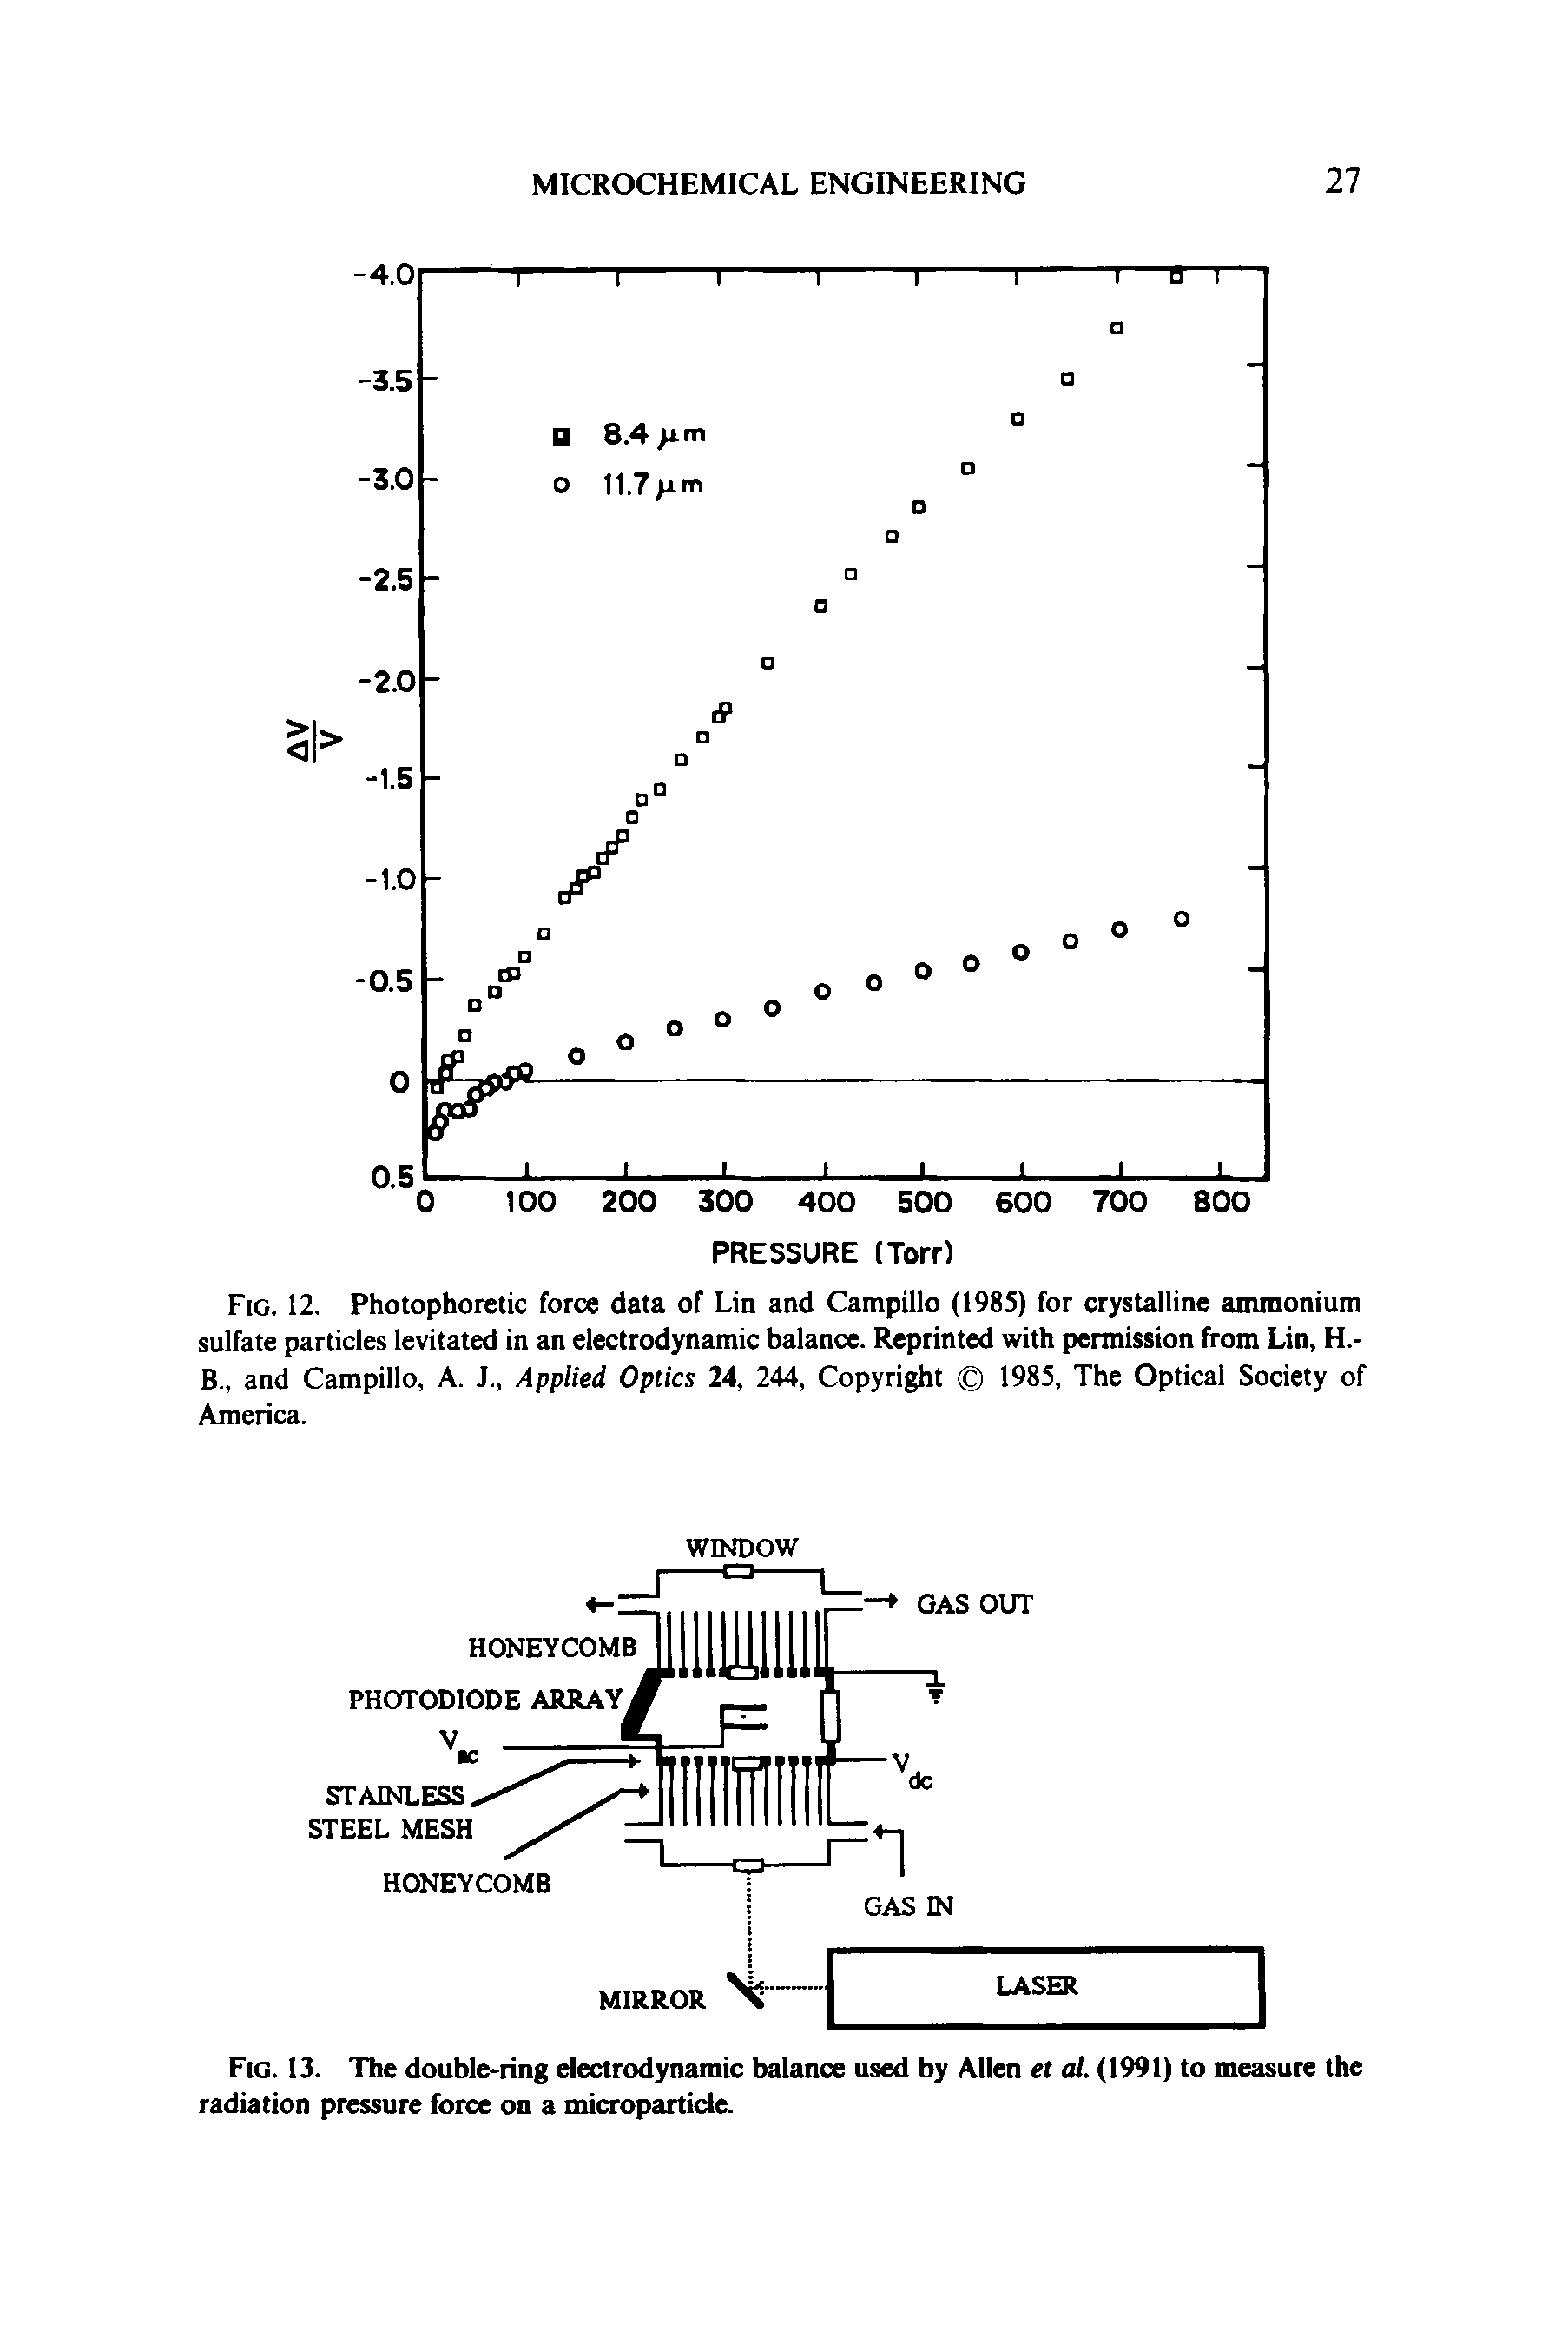 Fig. 13. The double-ring electrodynamic balance used by Allen et al. (1991) to measure the radiation pressure force on a microparticle.